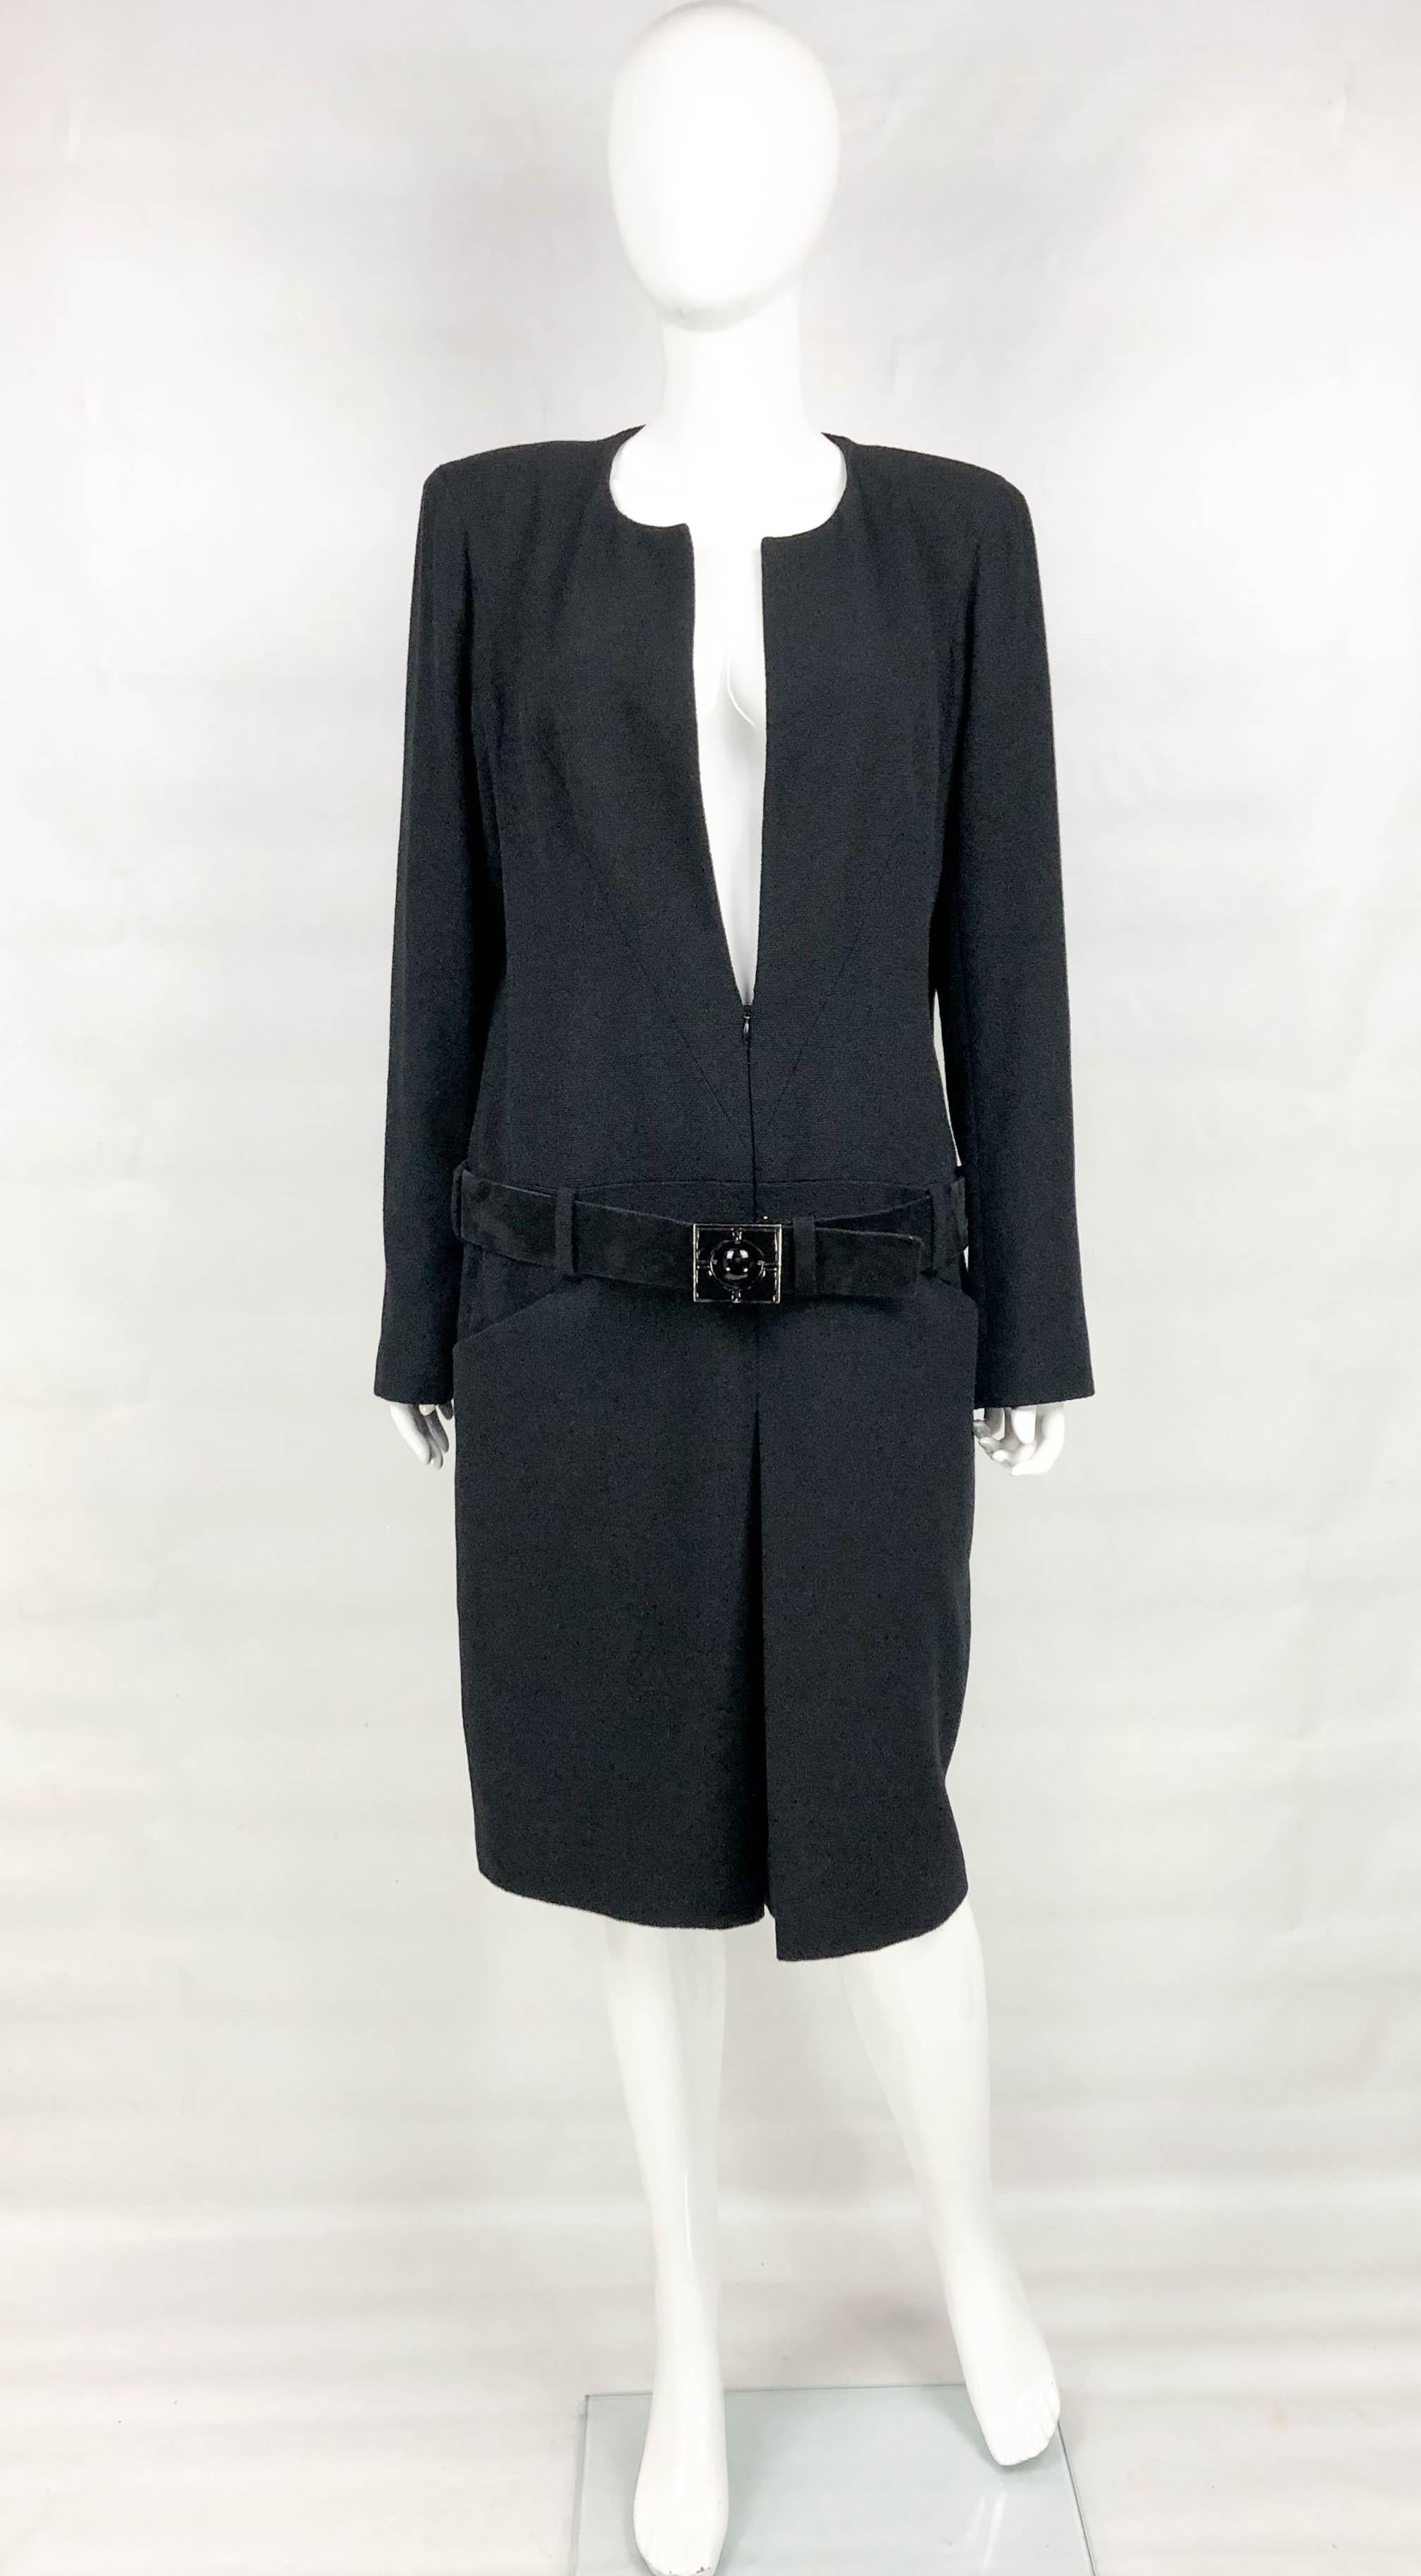 Chanel Runway Black Wool Belted Dress Coat. This very stylish piece by Chanel was crafted for the 2009 Autumn / Winter Collection. Please refer to photos for an identical piece being worn by a model on the runway. Made in black wool, it features a